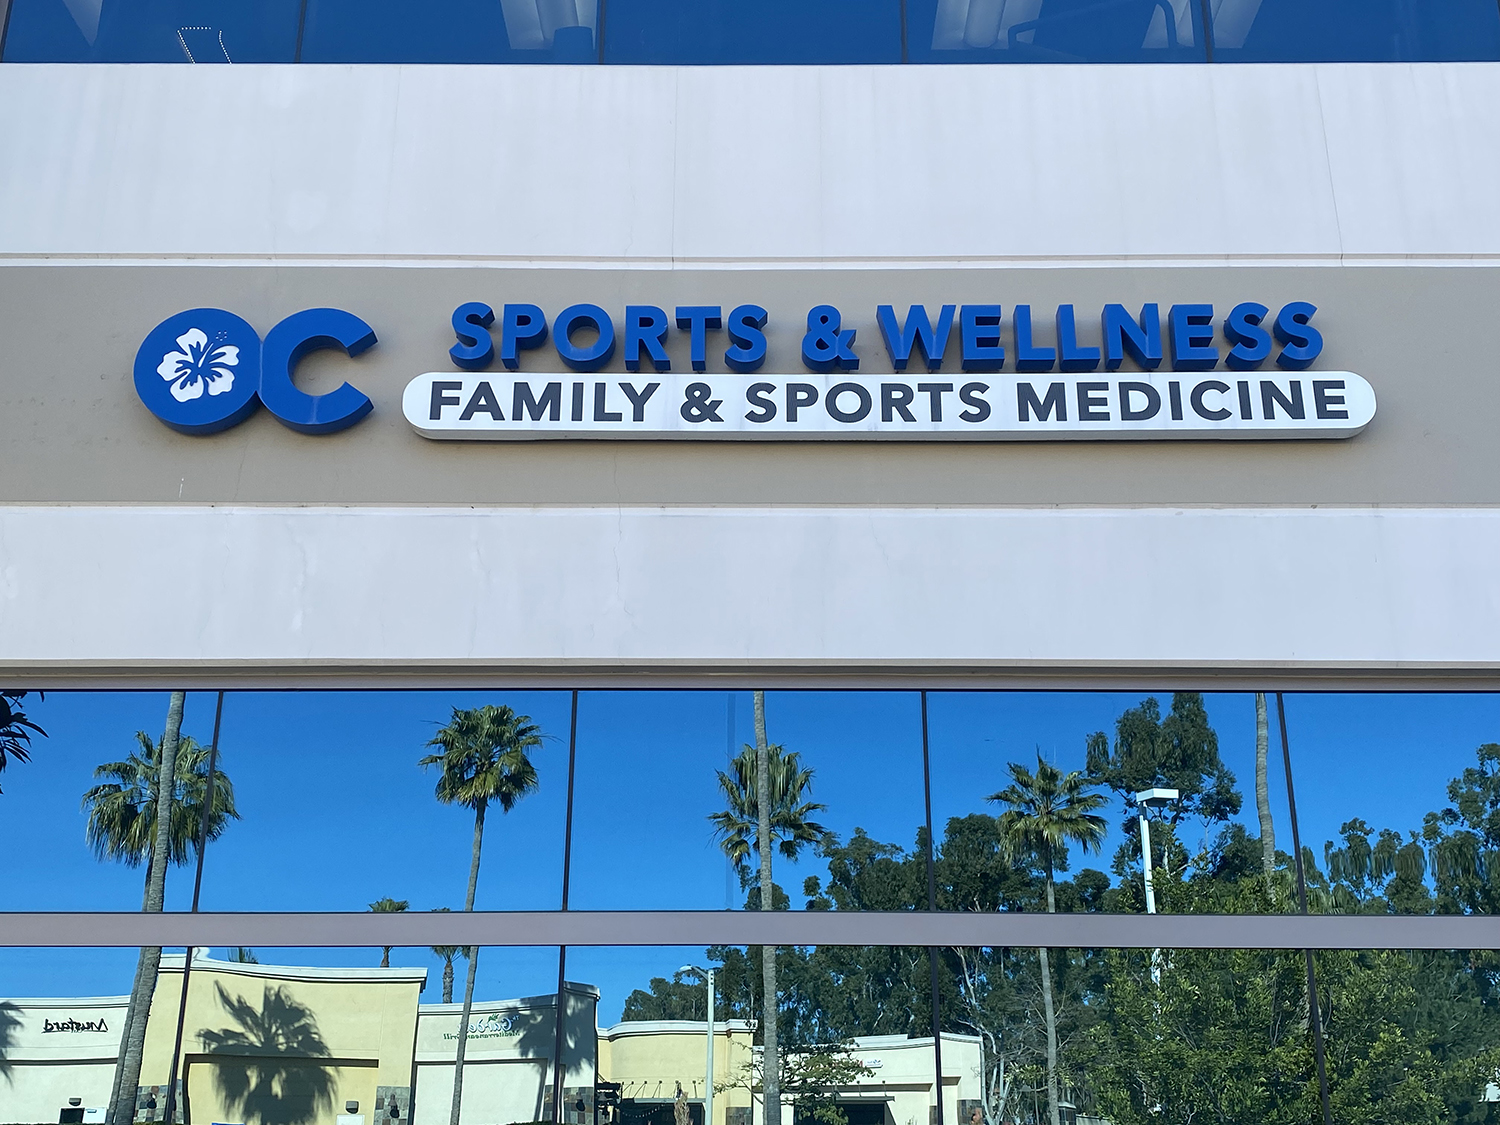 OC Sports and Wellness 26700 Towne Centre Dr Ste 100, Foothill Ranch California 92610